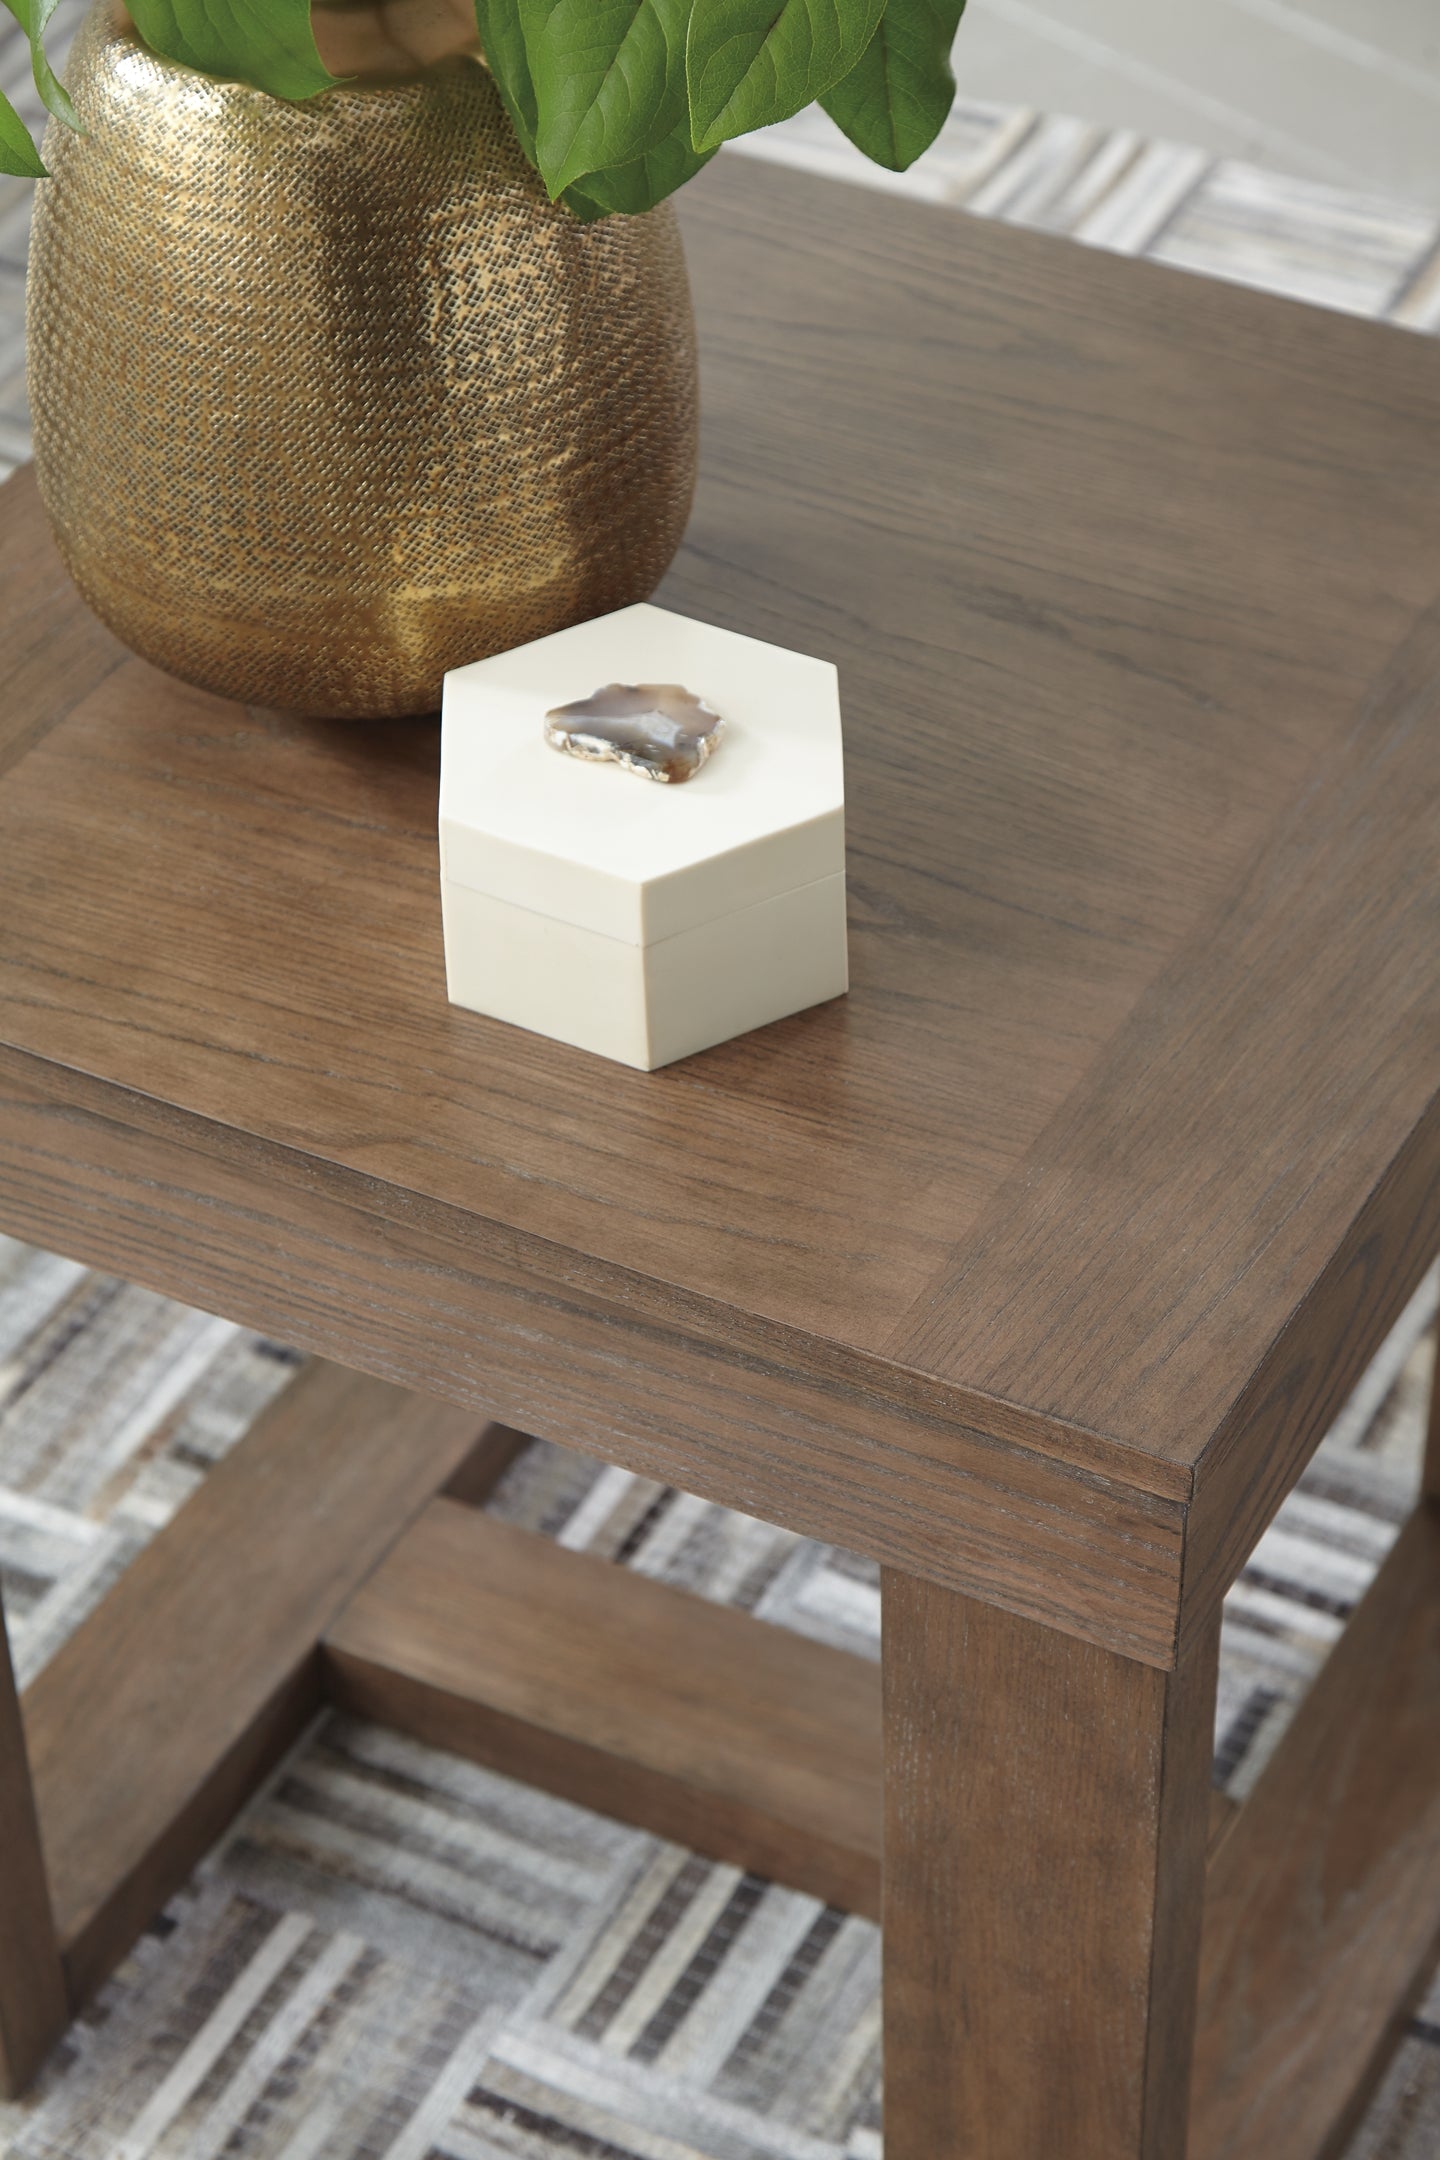 Cariton Coffee Table with 1 End Table Signature Design by Ashley®